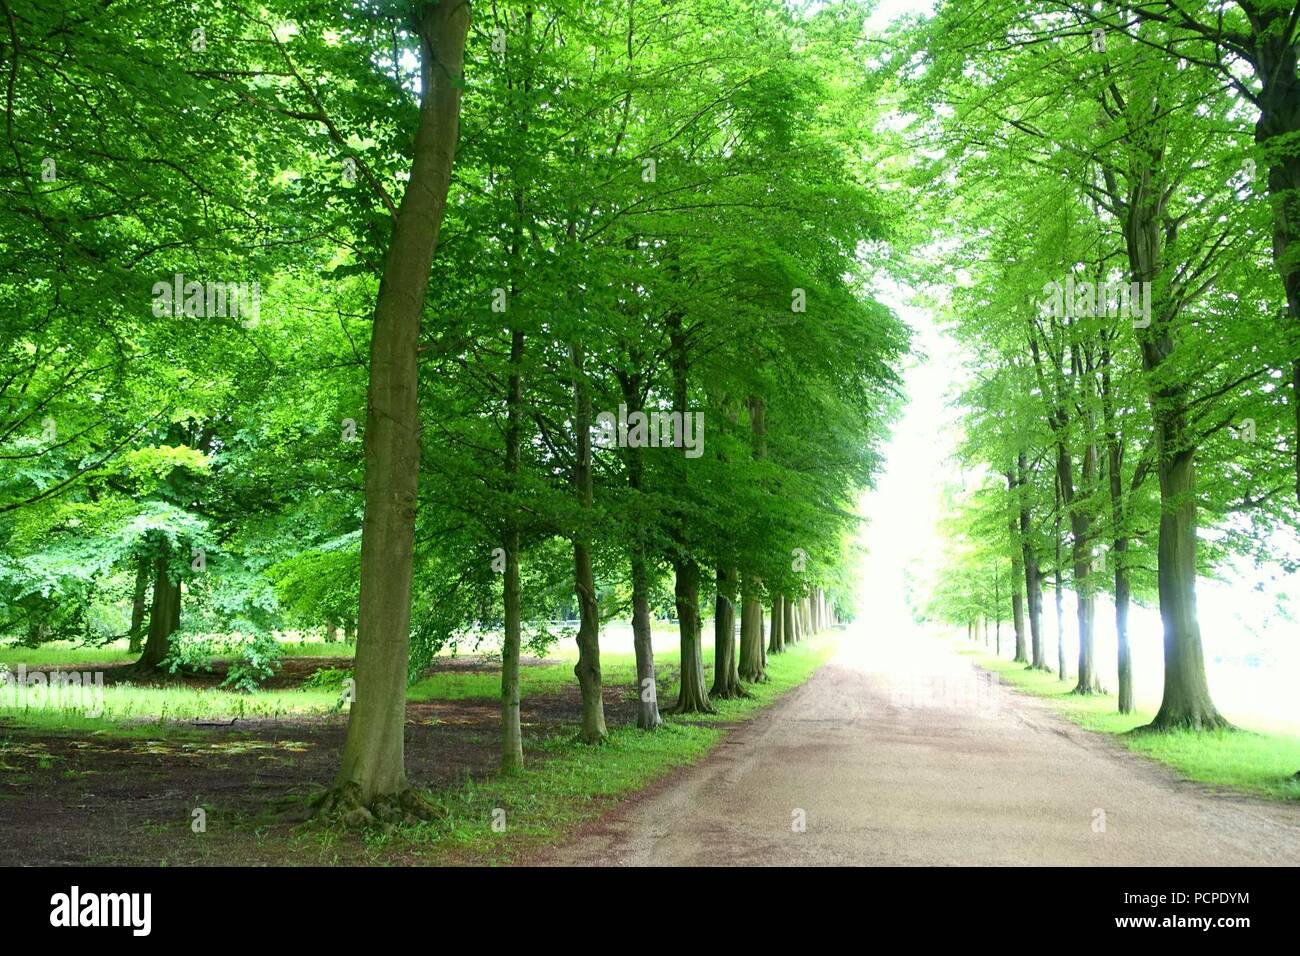 Allee, in Richtung Blanche vase - Chatsworth House - Derbyshire, England - 03583. Stockfoto